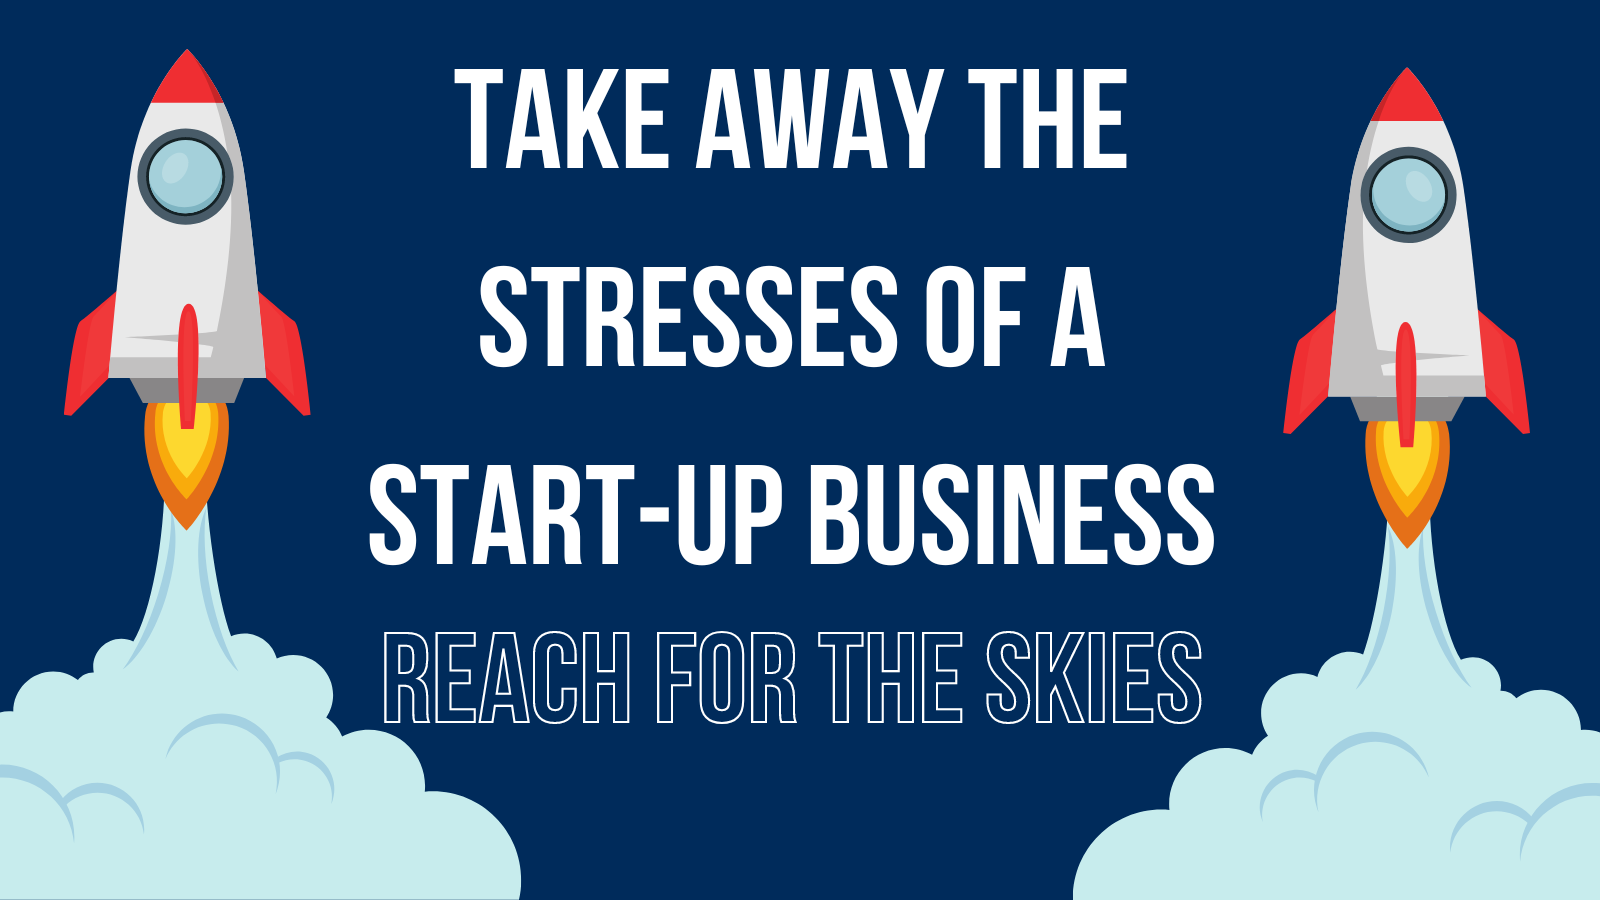 Take away the stresses of a start up business